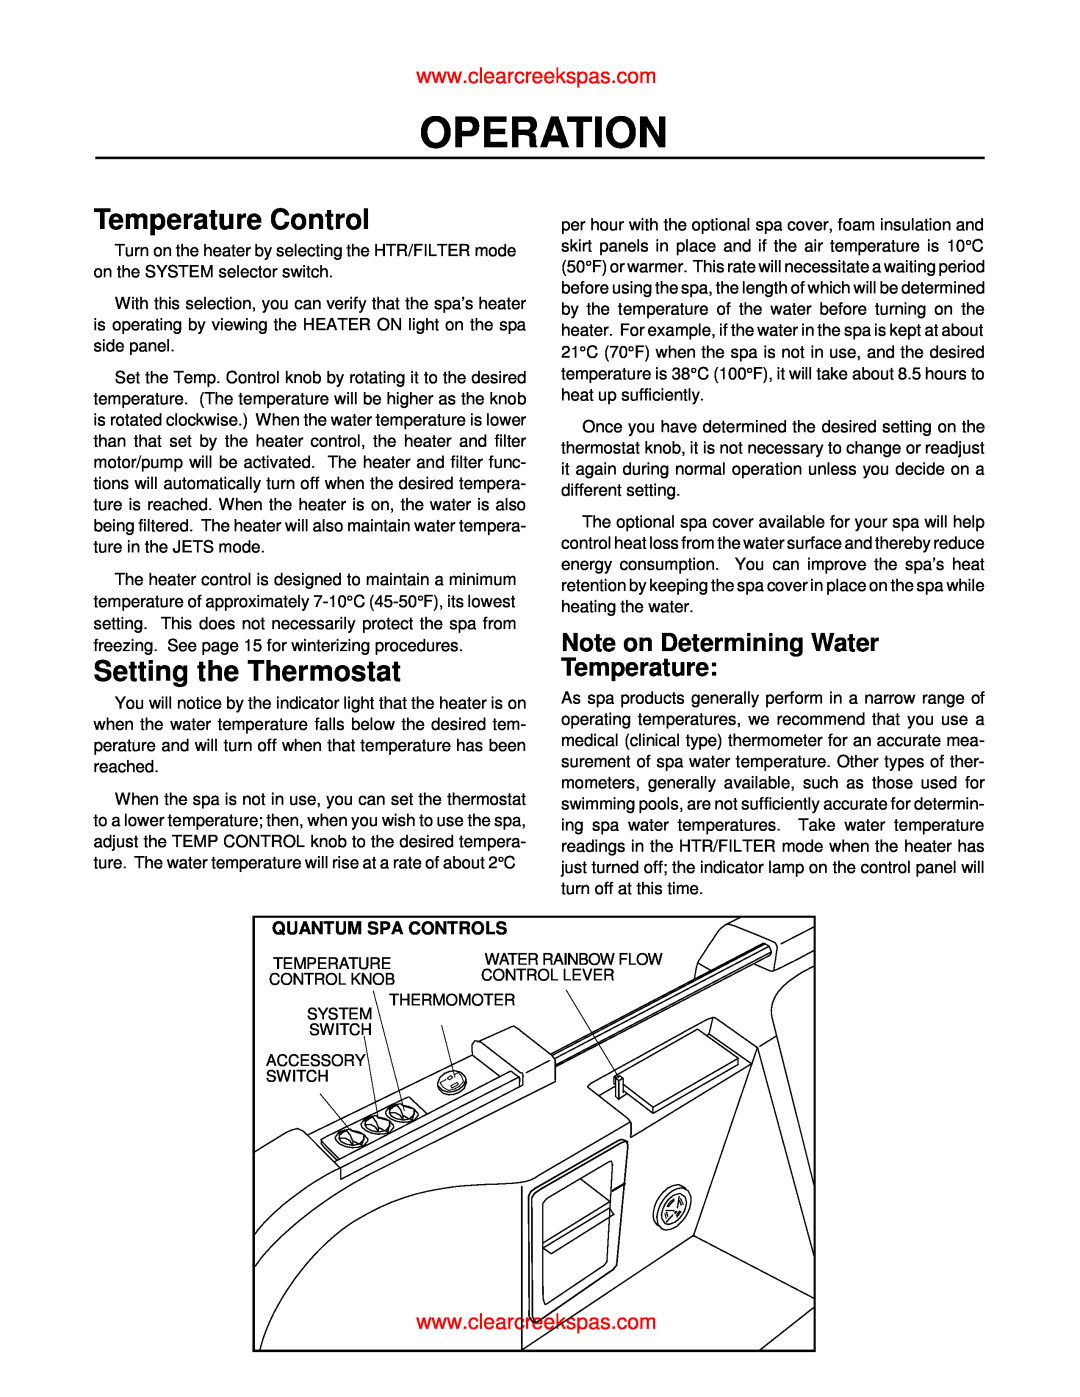 Whirlpool oortable spa Temperature Control, Setting the Thermostat, Note on Determining Water Temperature, Operation 